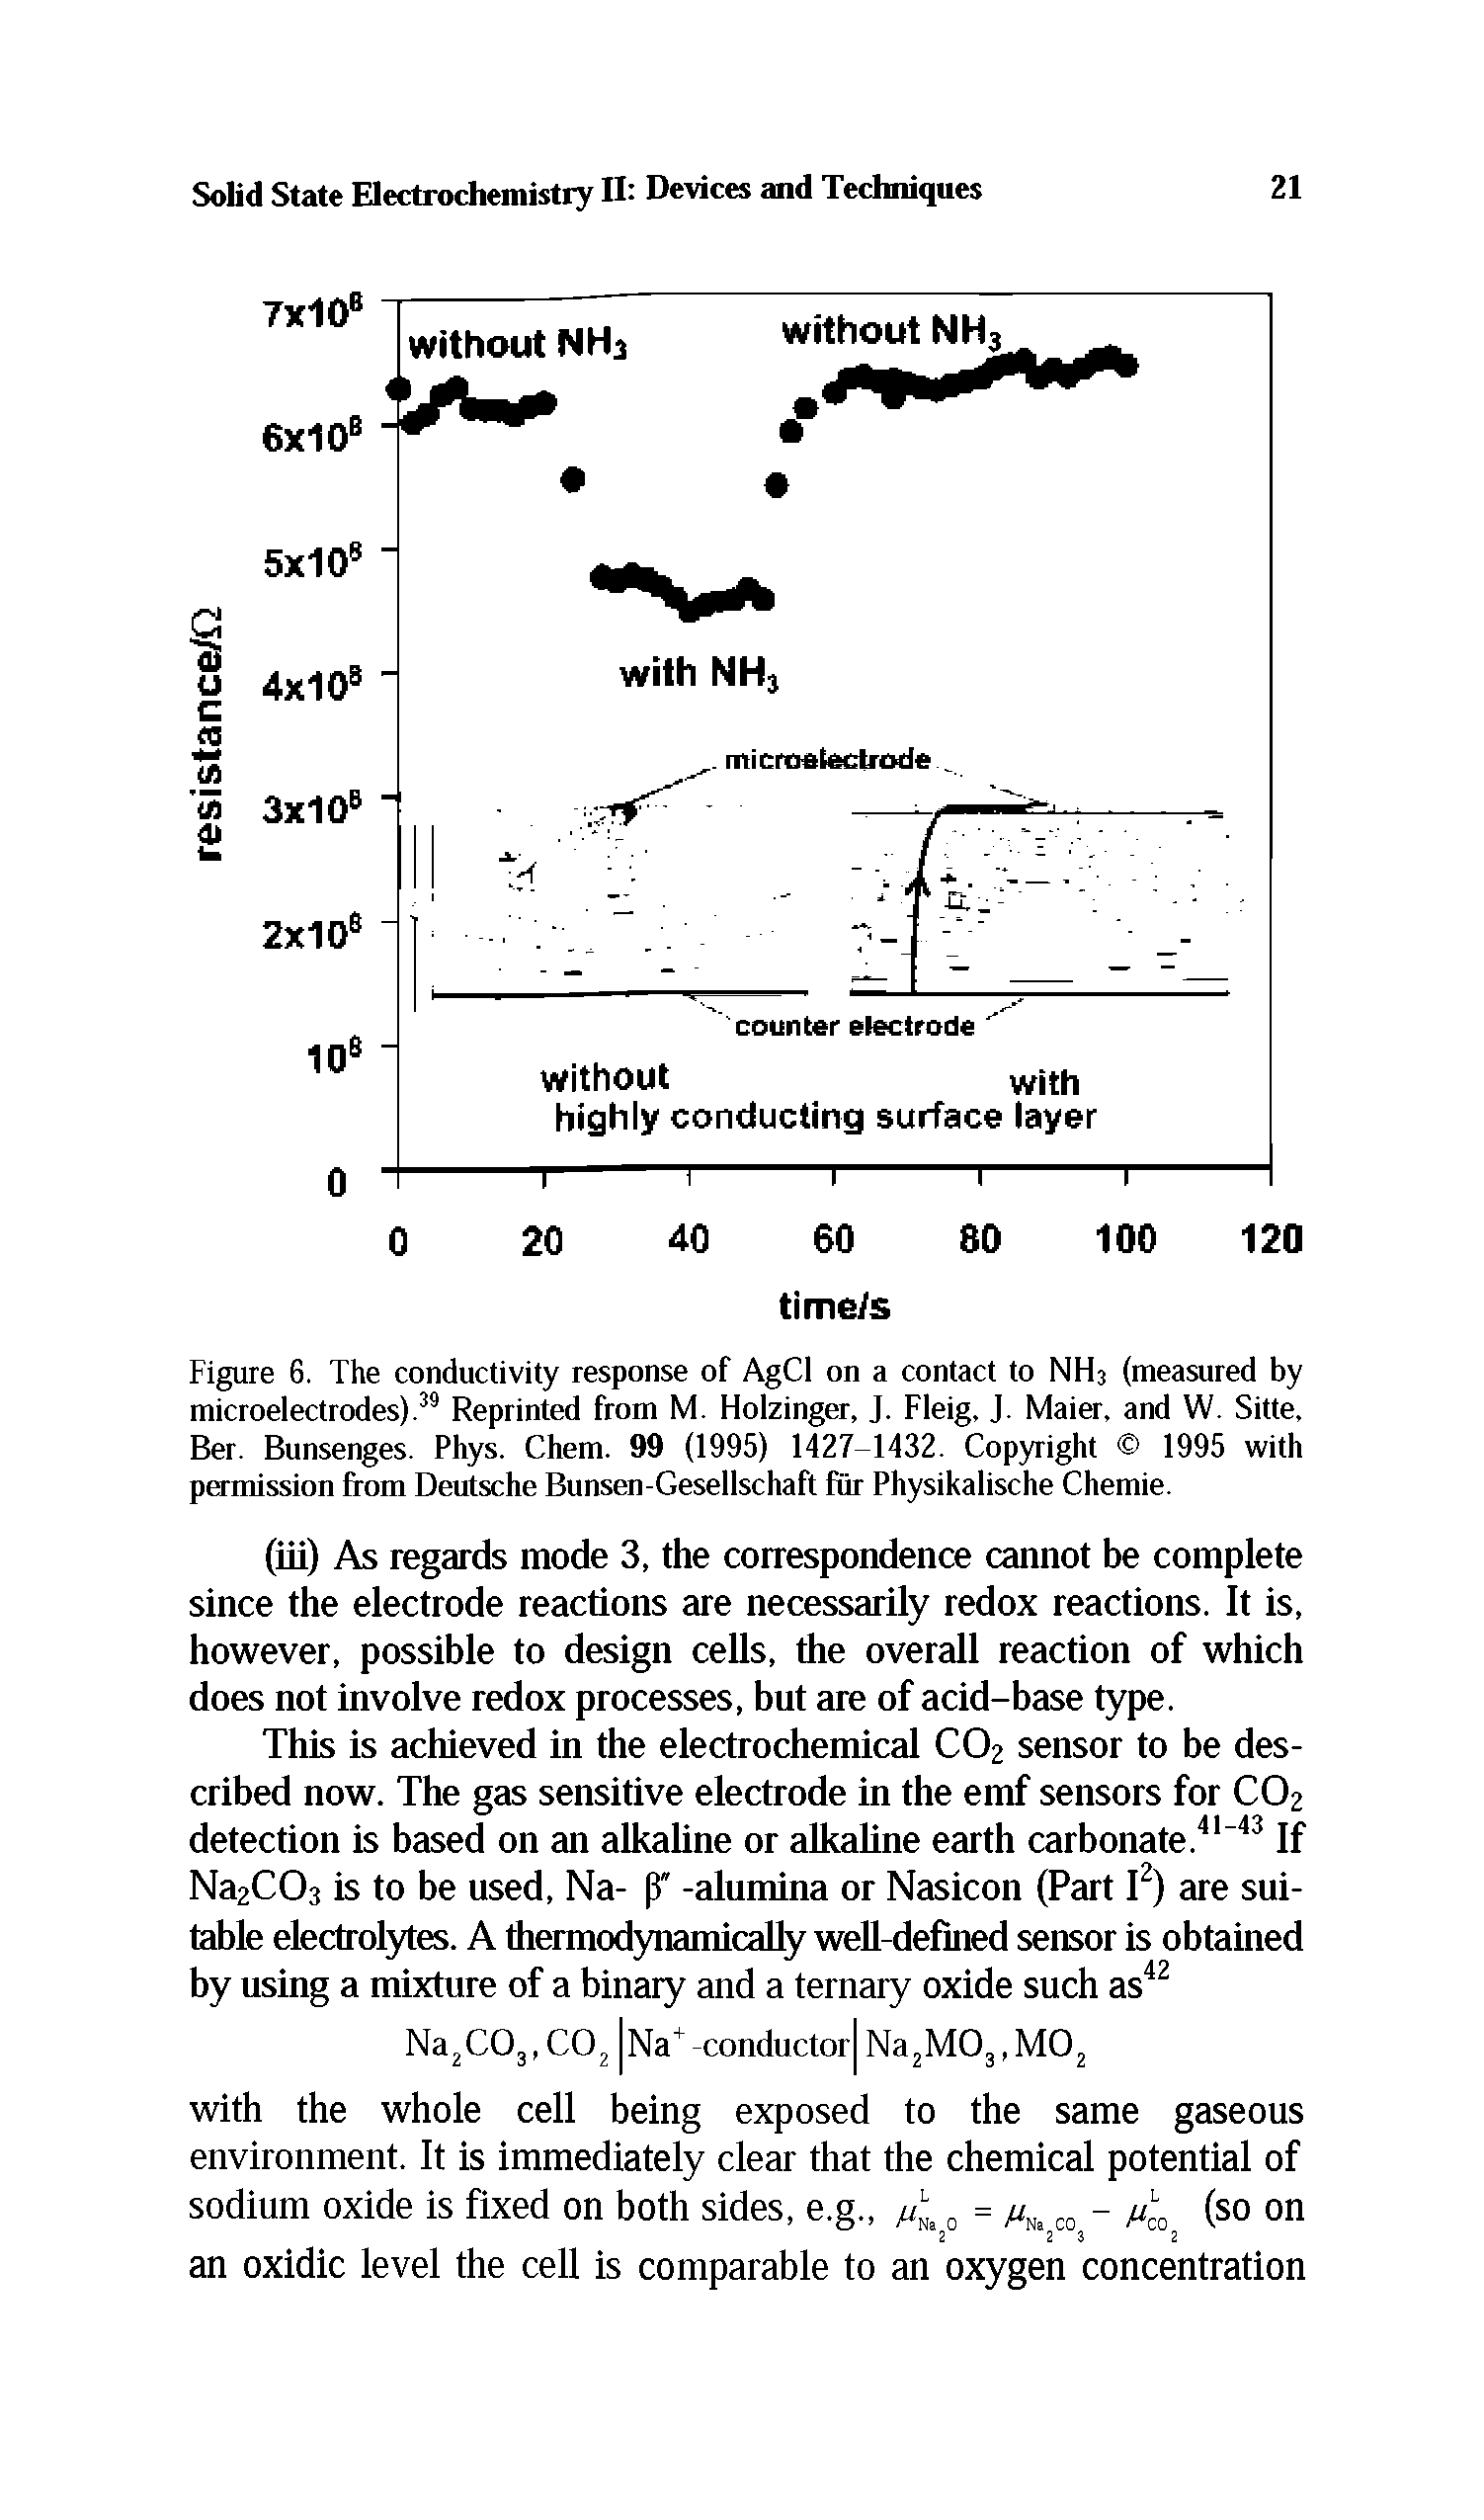 Figure 6. The conductivity response of AgCl on a contact to NH3 (measured by microelectrodes).39 Reprinted from M. Holzinger, J. Fleig, J. Maier, and W. Sitte, Ber. Bunsenges. Phys. Chem. 99 (1995) 1427-1432. Copyright 1995 with permission from Deutsche Bunsen-Gesellschaft fur Physikalische Chemie.